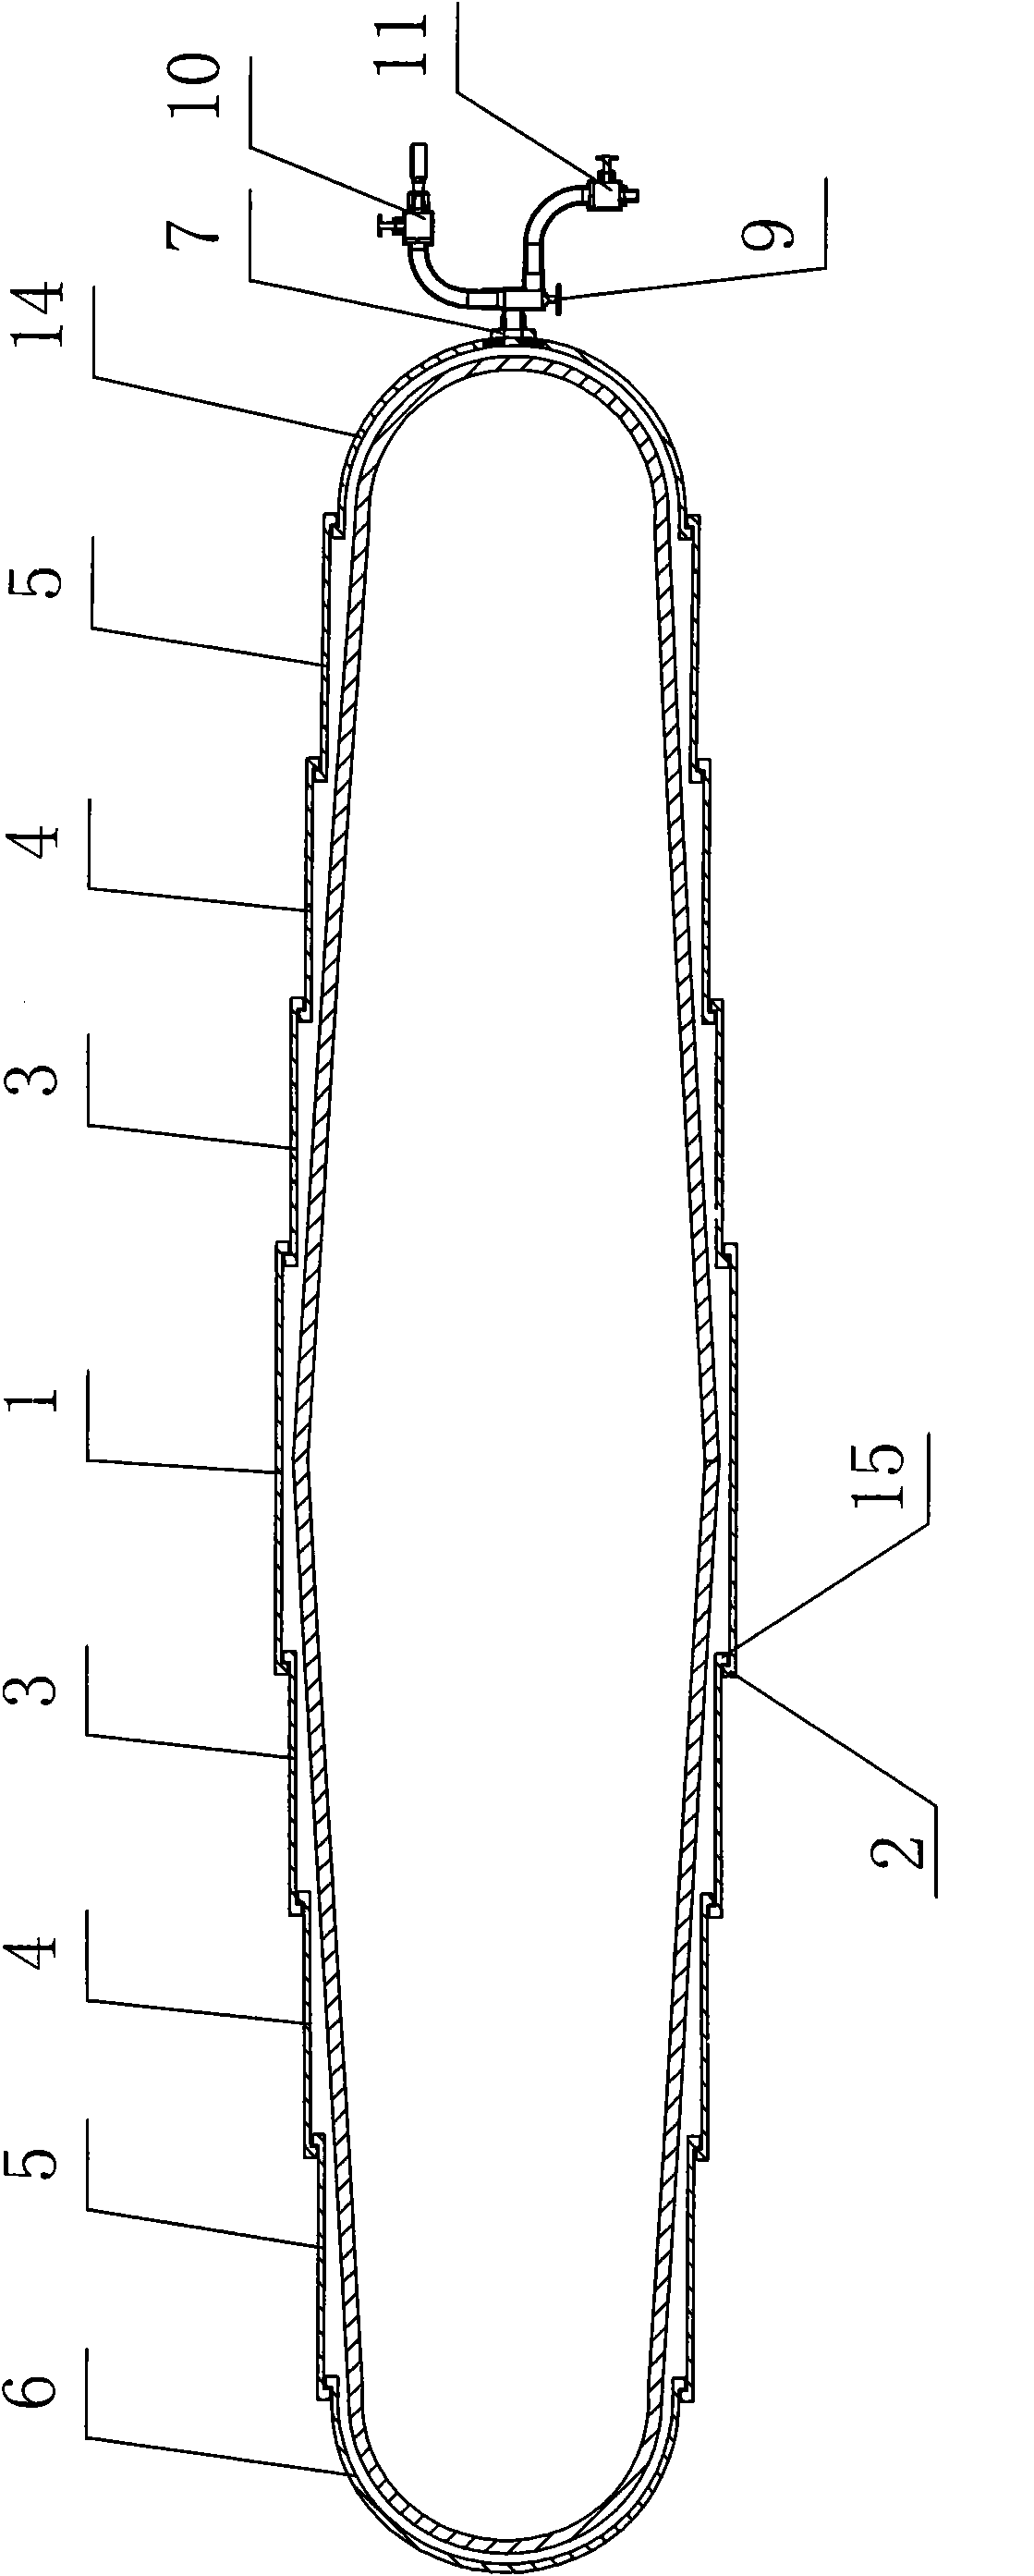 Telescopic multifunctional rescue device capable of collecting and supplying air power